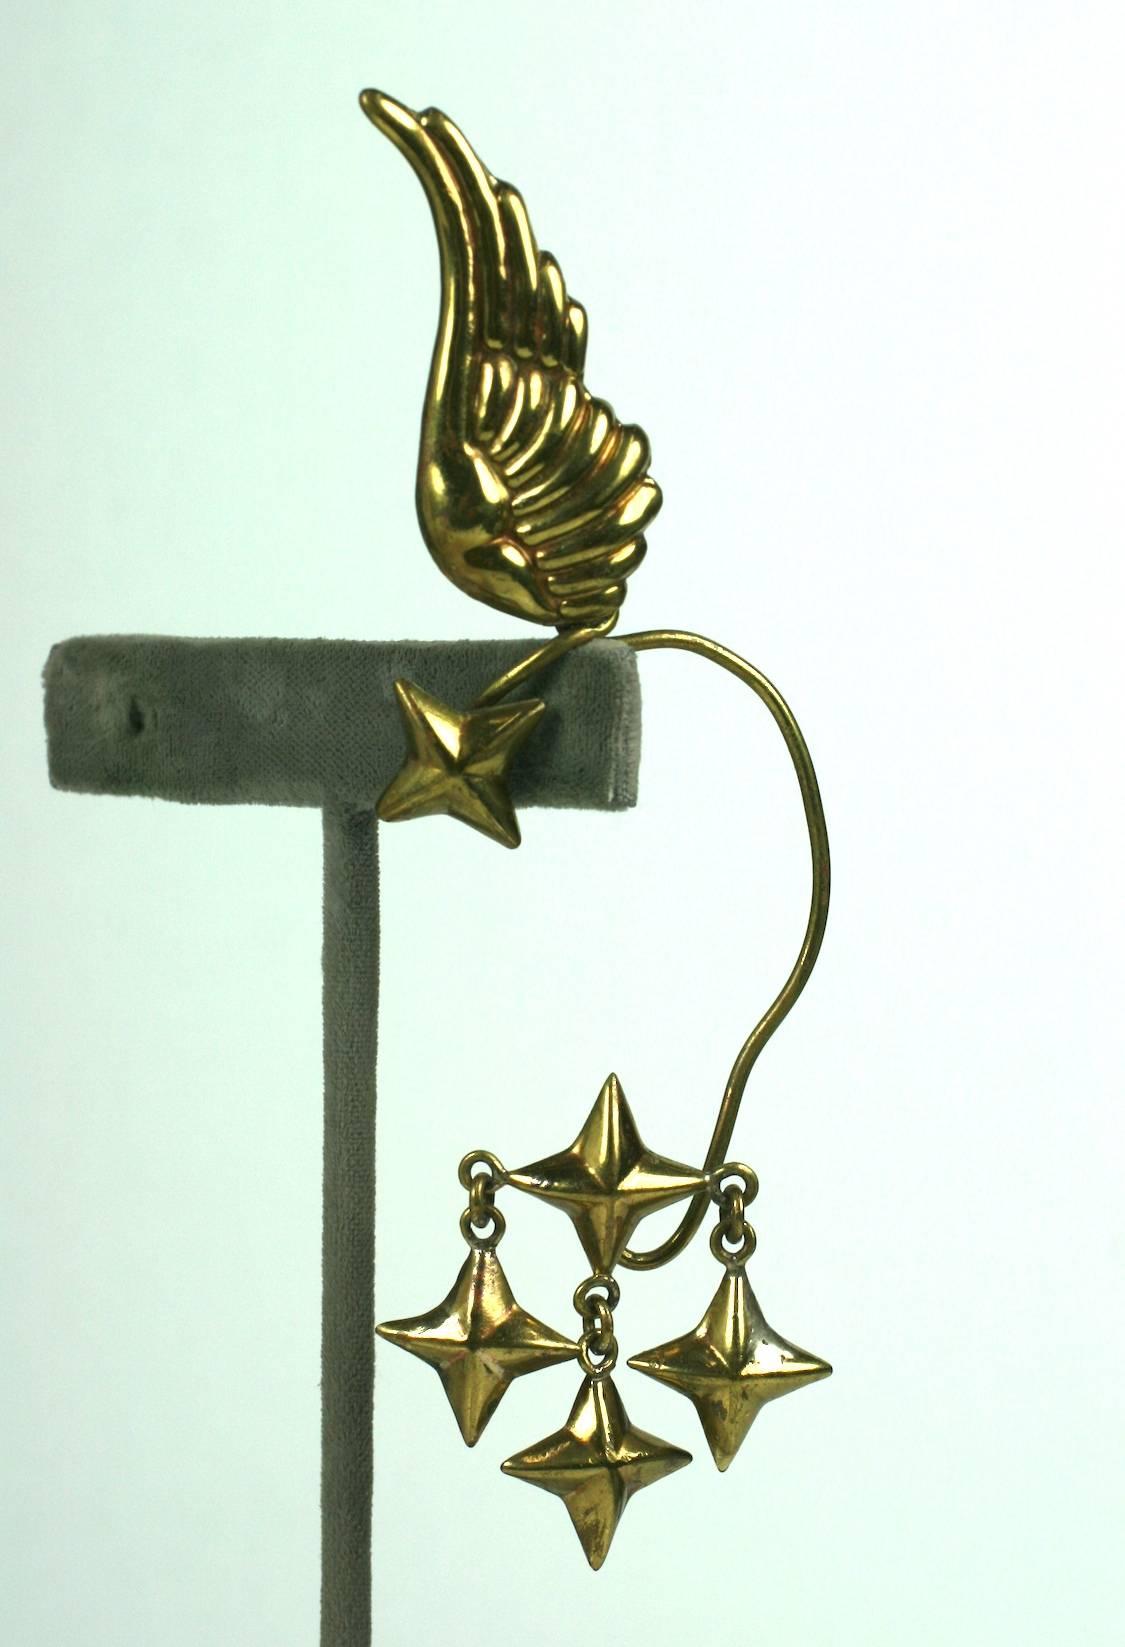 Hubert Harmon winged star drop earrings, designed to be worn over the ear. The repousse wing sprouts from the top of your ear while the star pendants dangle below.
Rare to find work by this Taxco metal smith who worked in Europe (Schiaparelli)